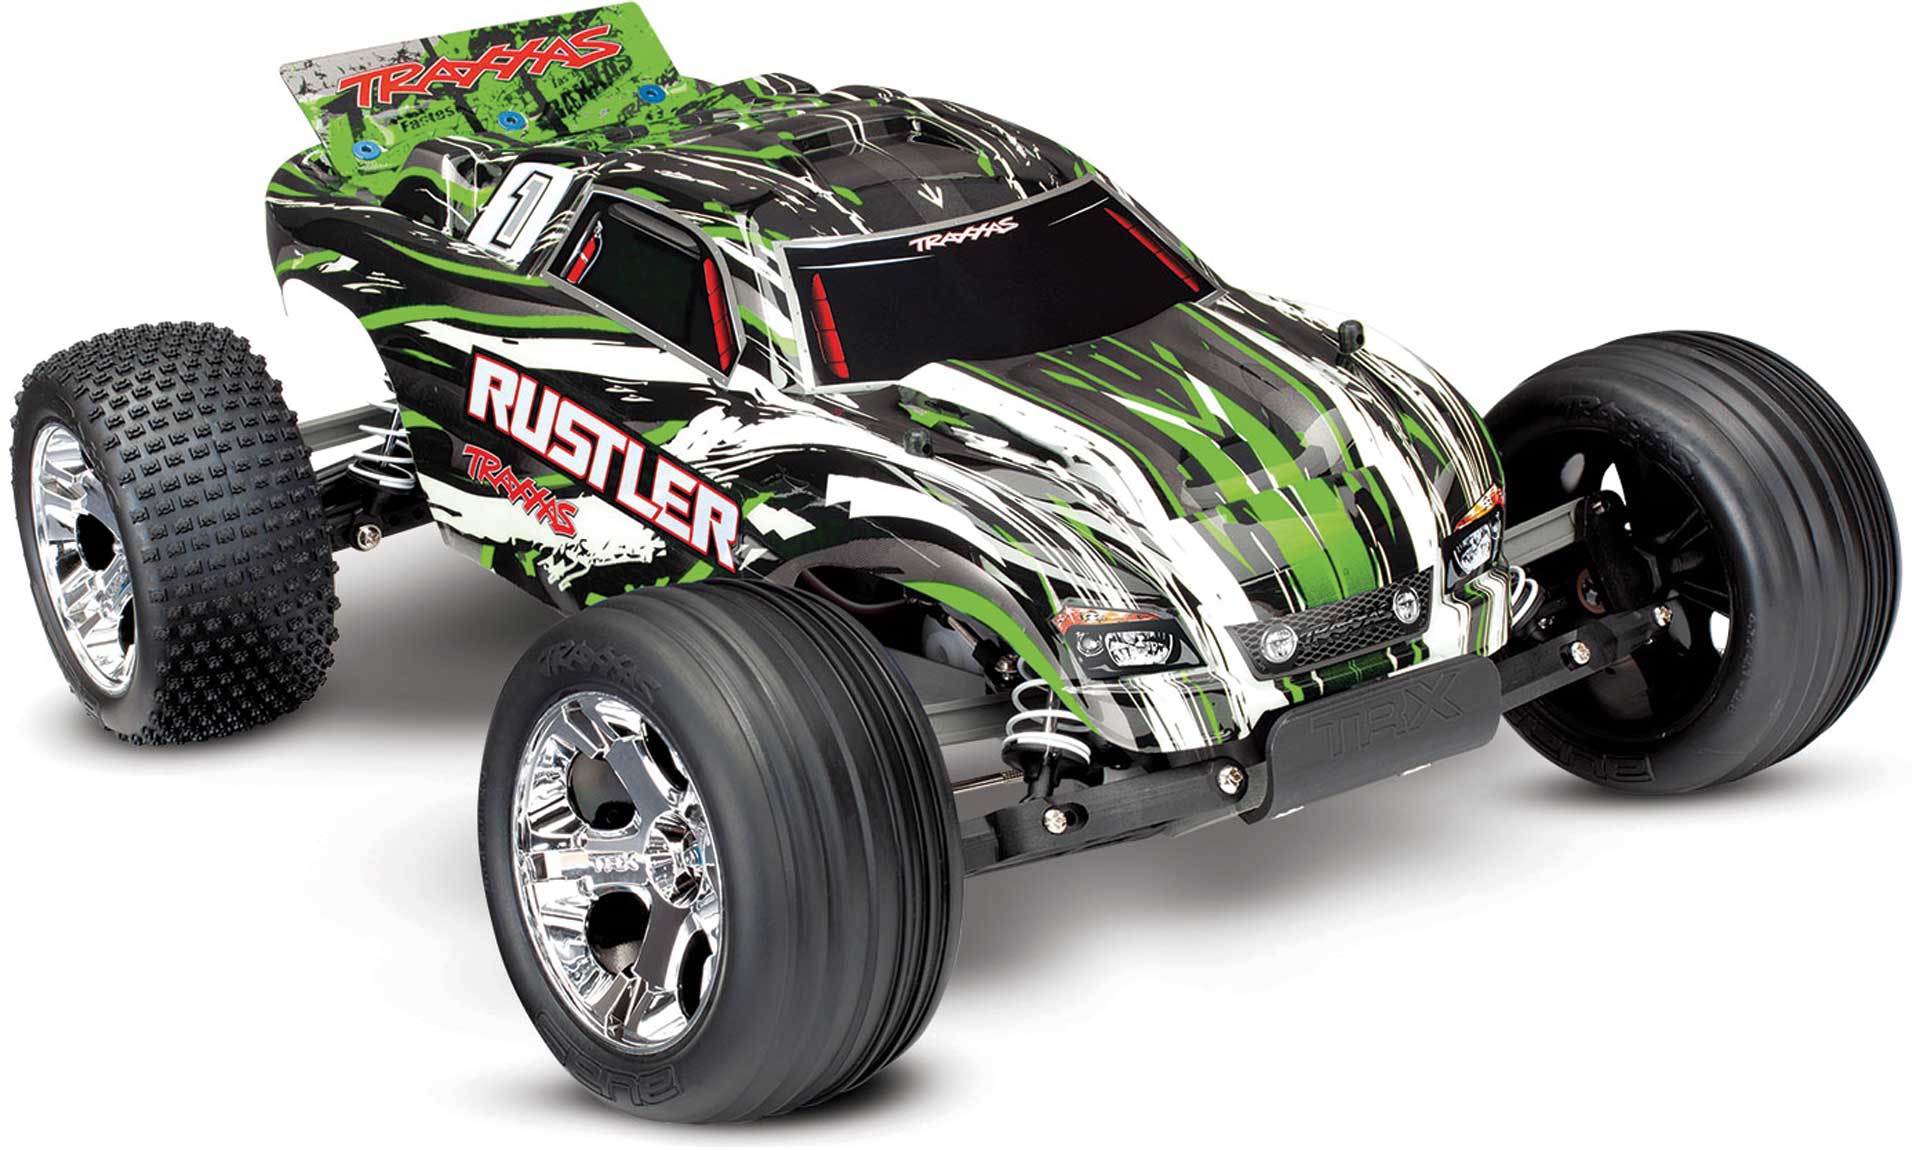 TRAXXAS RUSTLER vert  RTR SANS ACCU /CHARGEUR 1/10 2WD MONSTER TRUCK BRUSHED